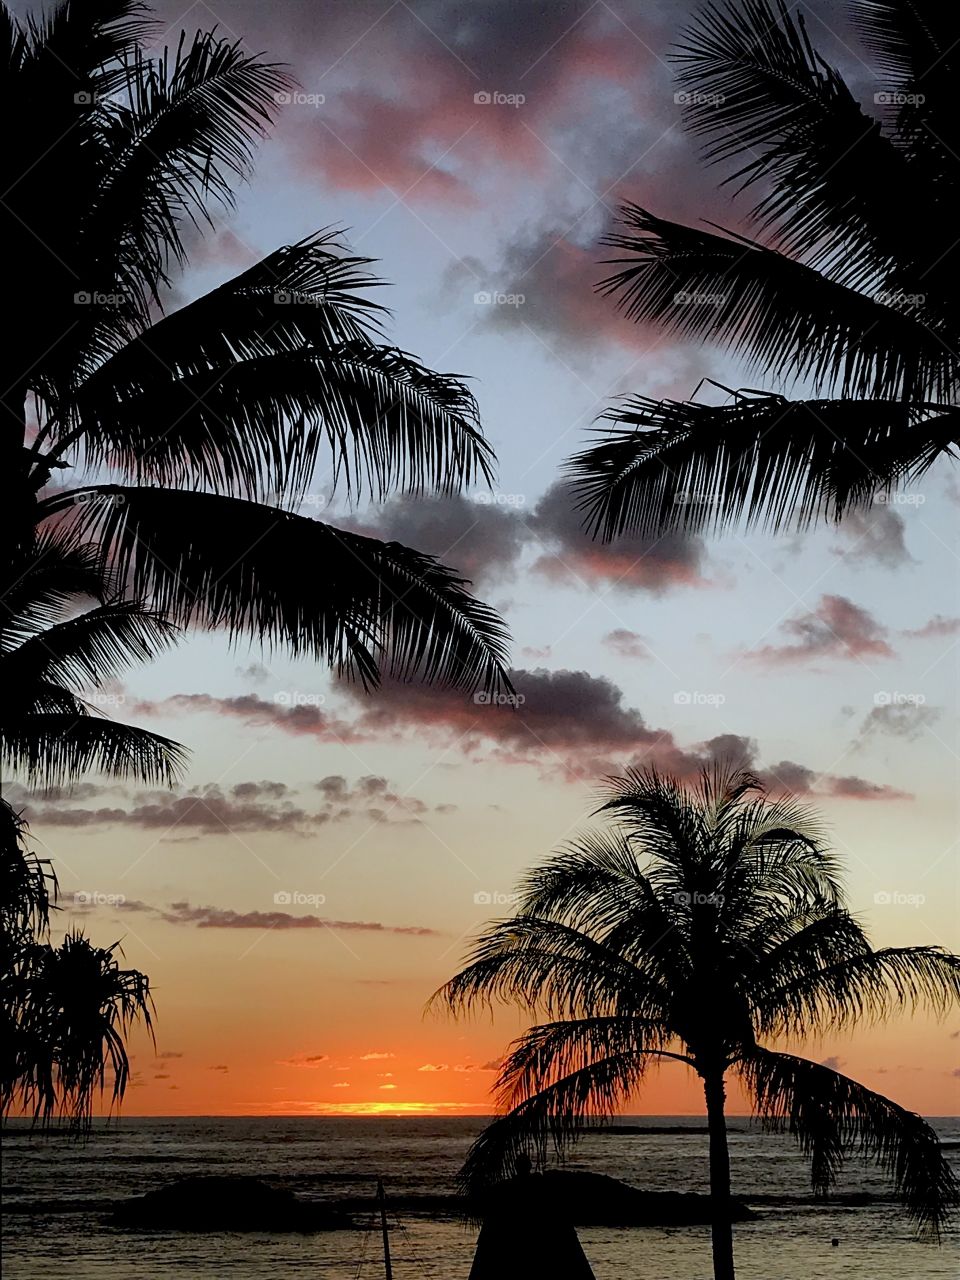 Hawaiian sunset creates purple clouds and silhouetted palm trees